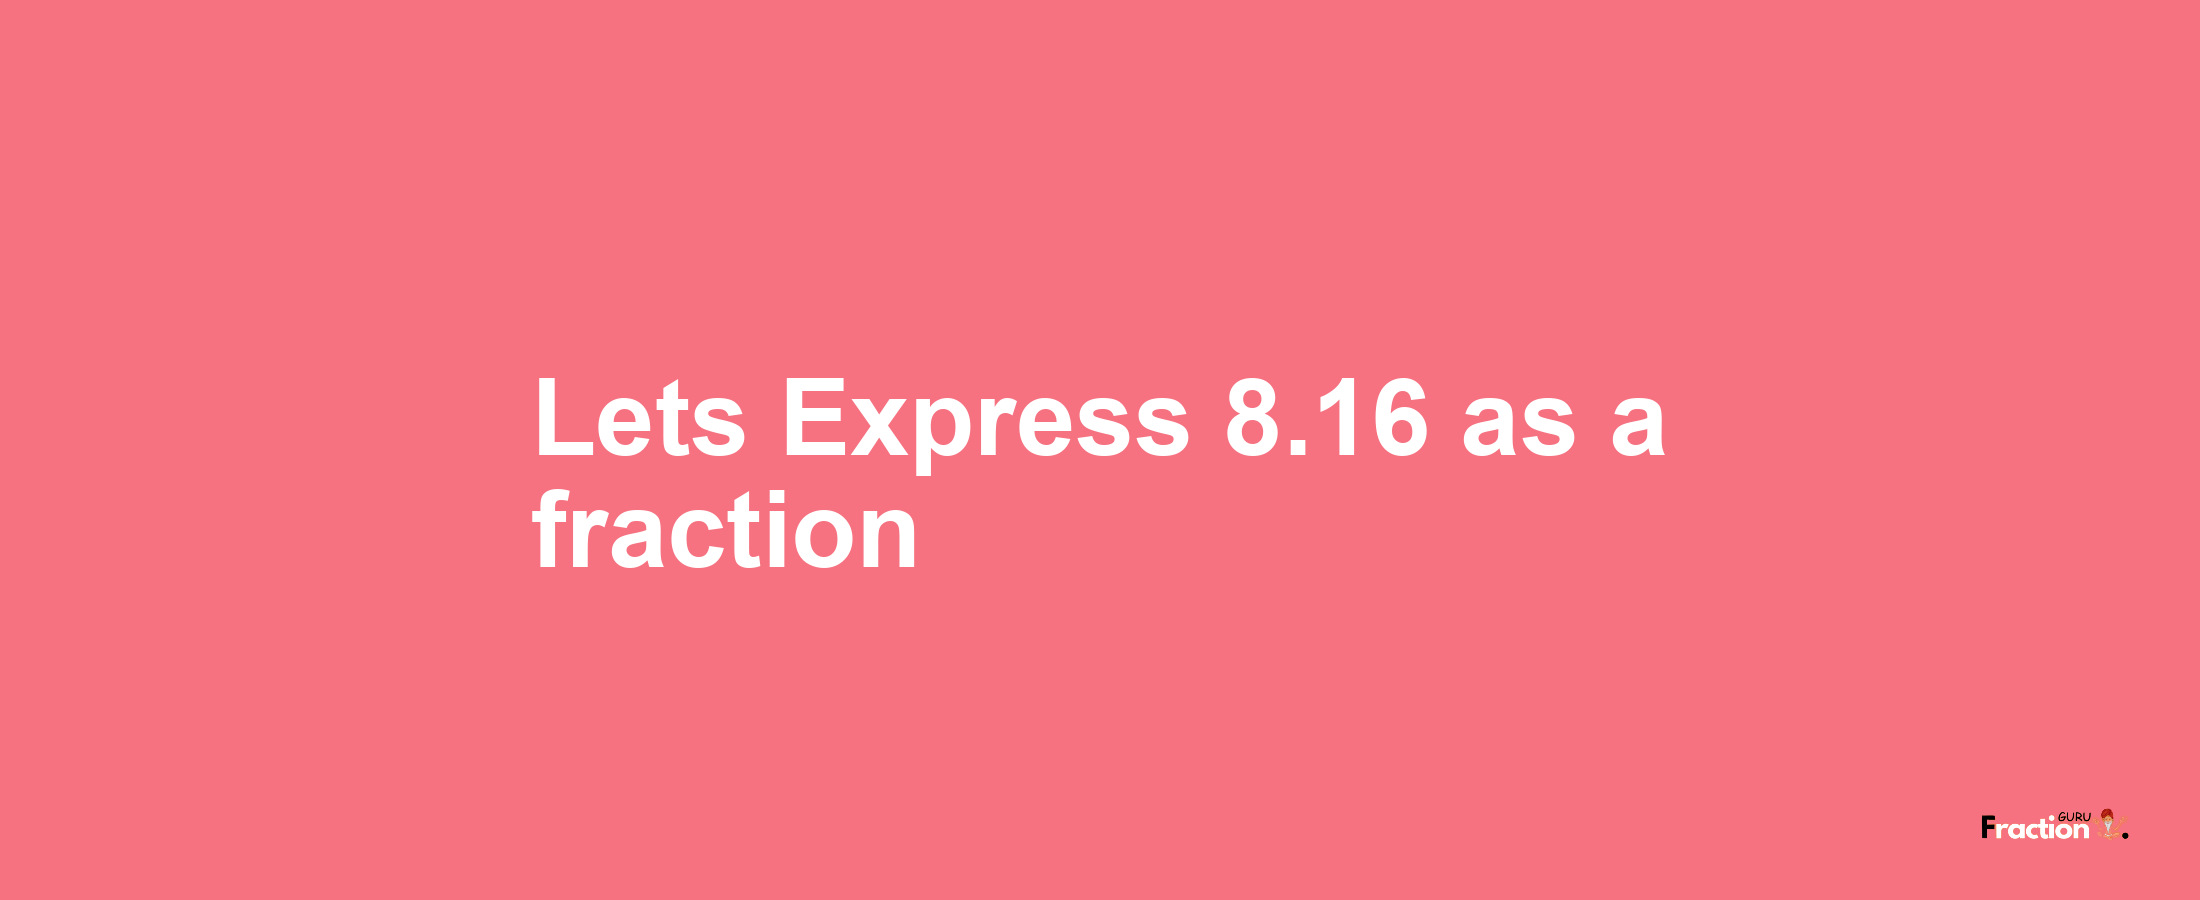 Lets Express 8.16 as afraction